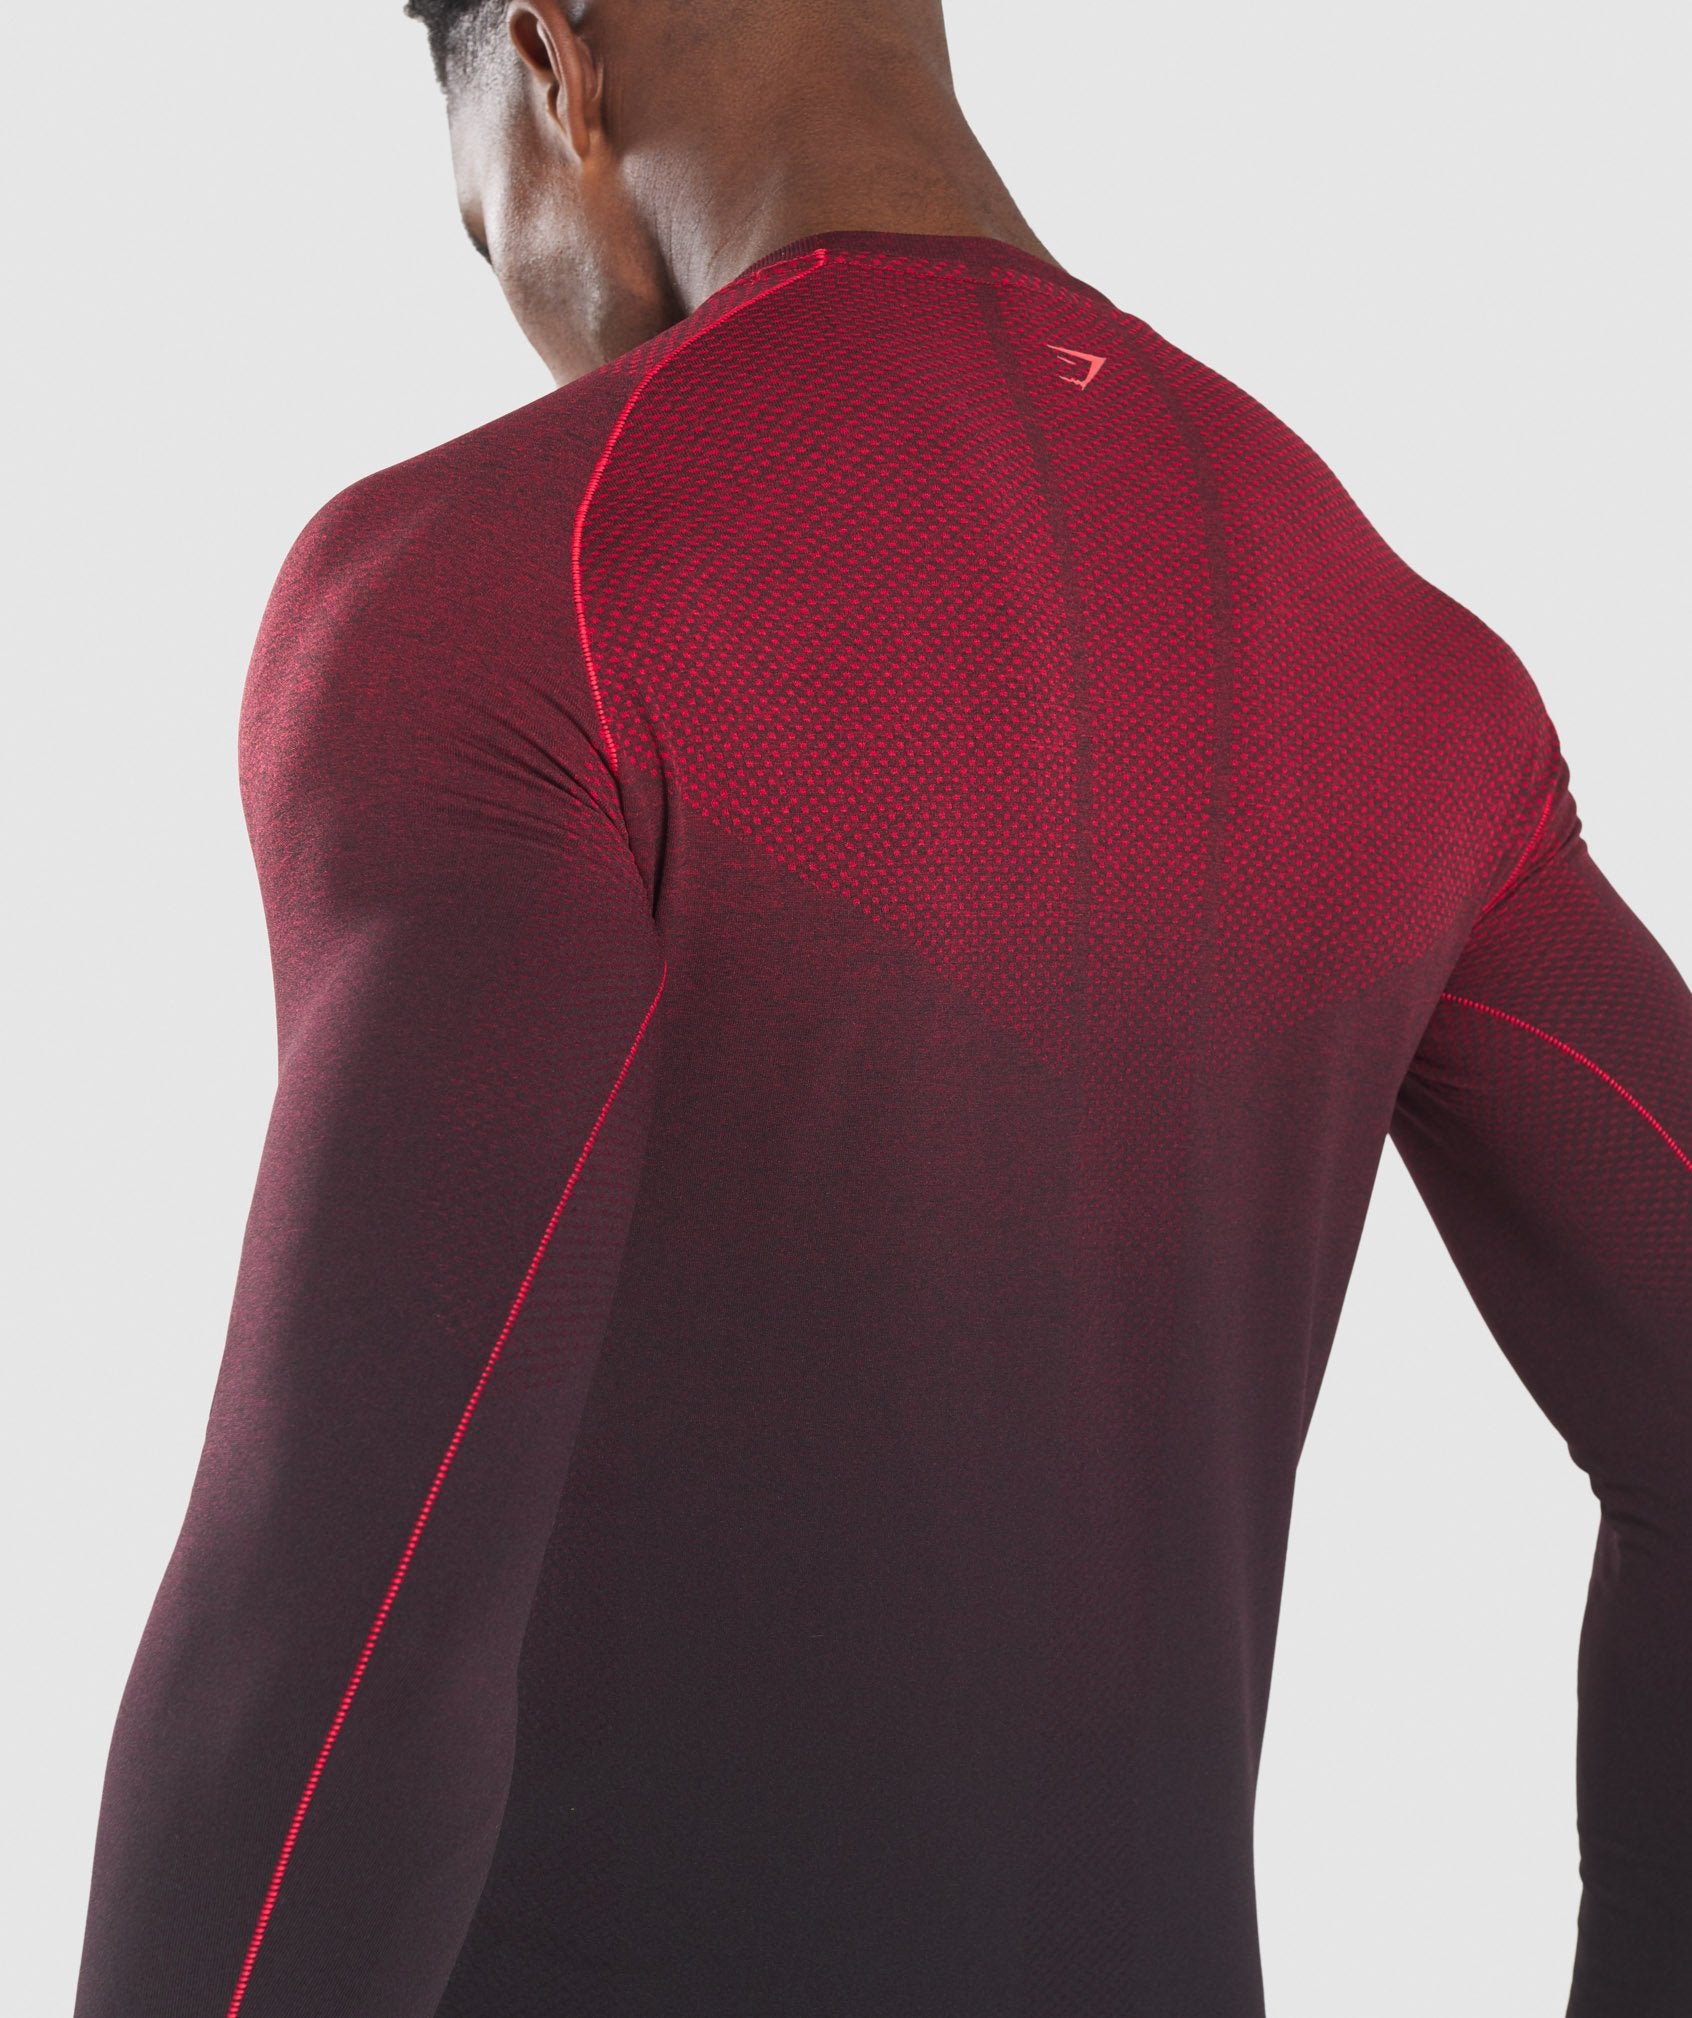 Vital Ombre Seamless Long Sleeve T-Shirt in Black/Red